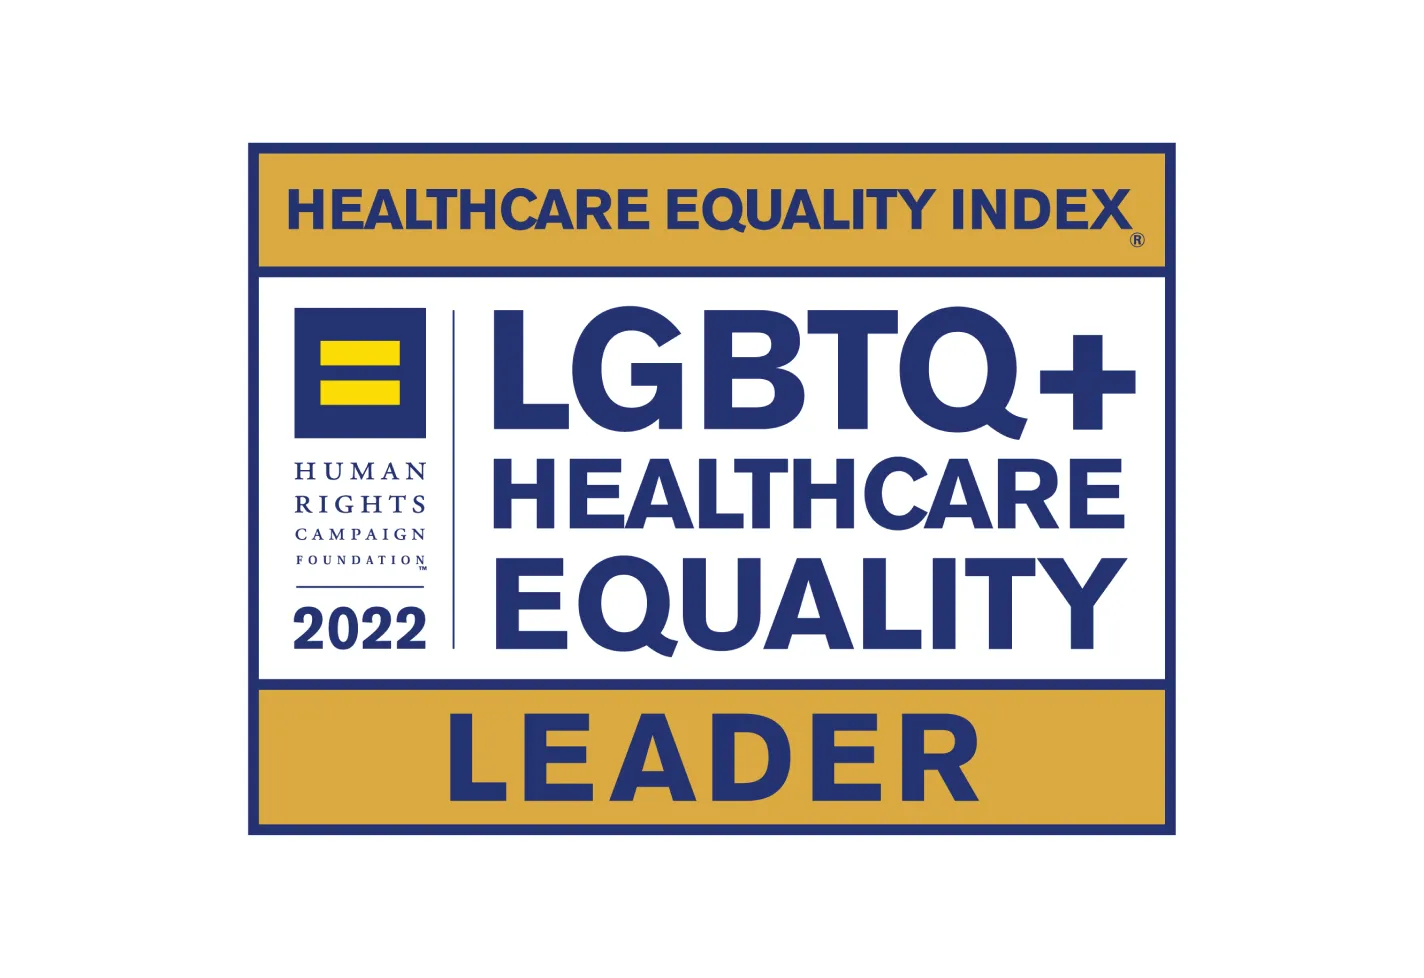 2022 Human Rights Campaign LGBTQ+ Healthcare Equality Index Leader